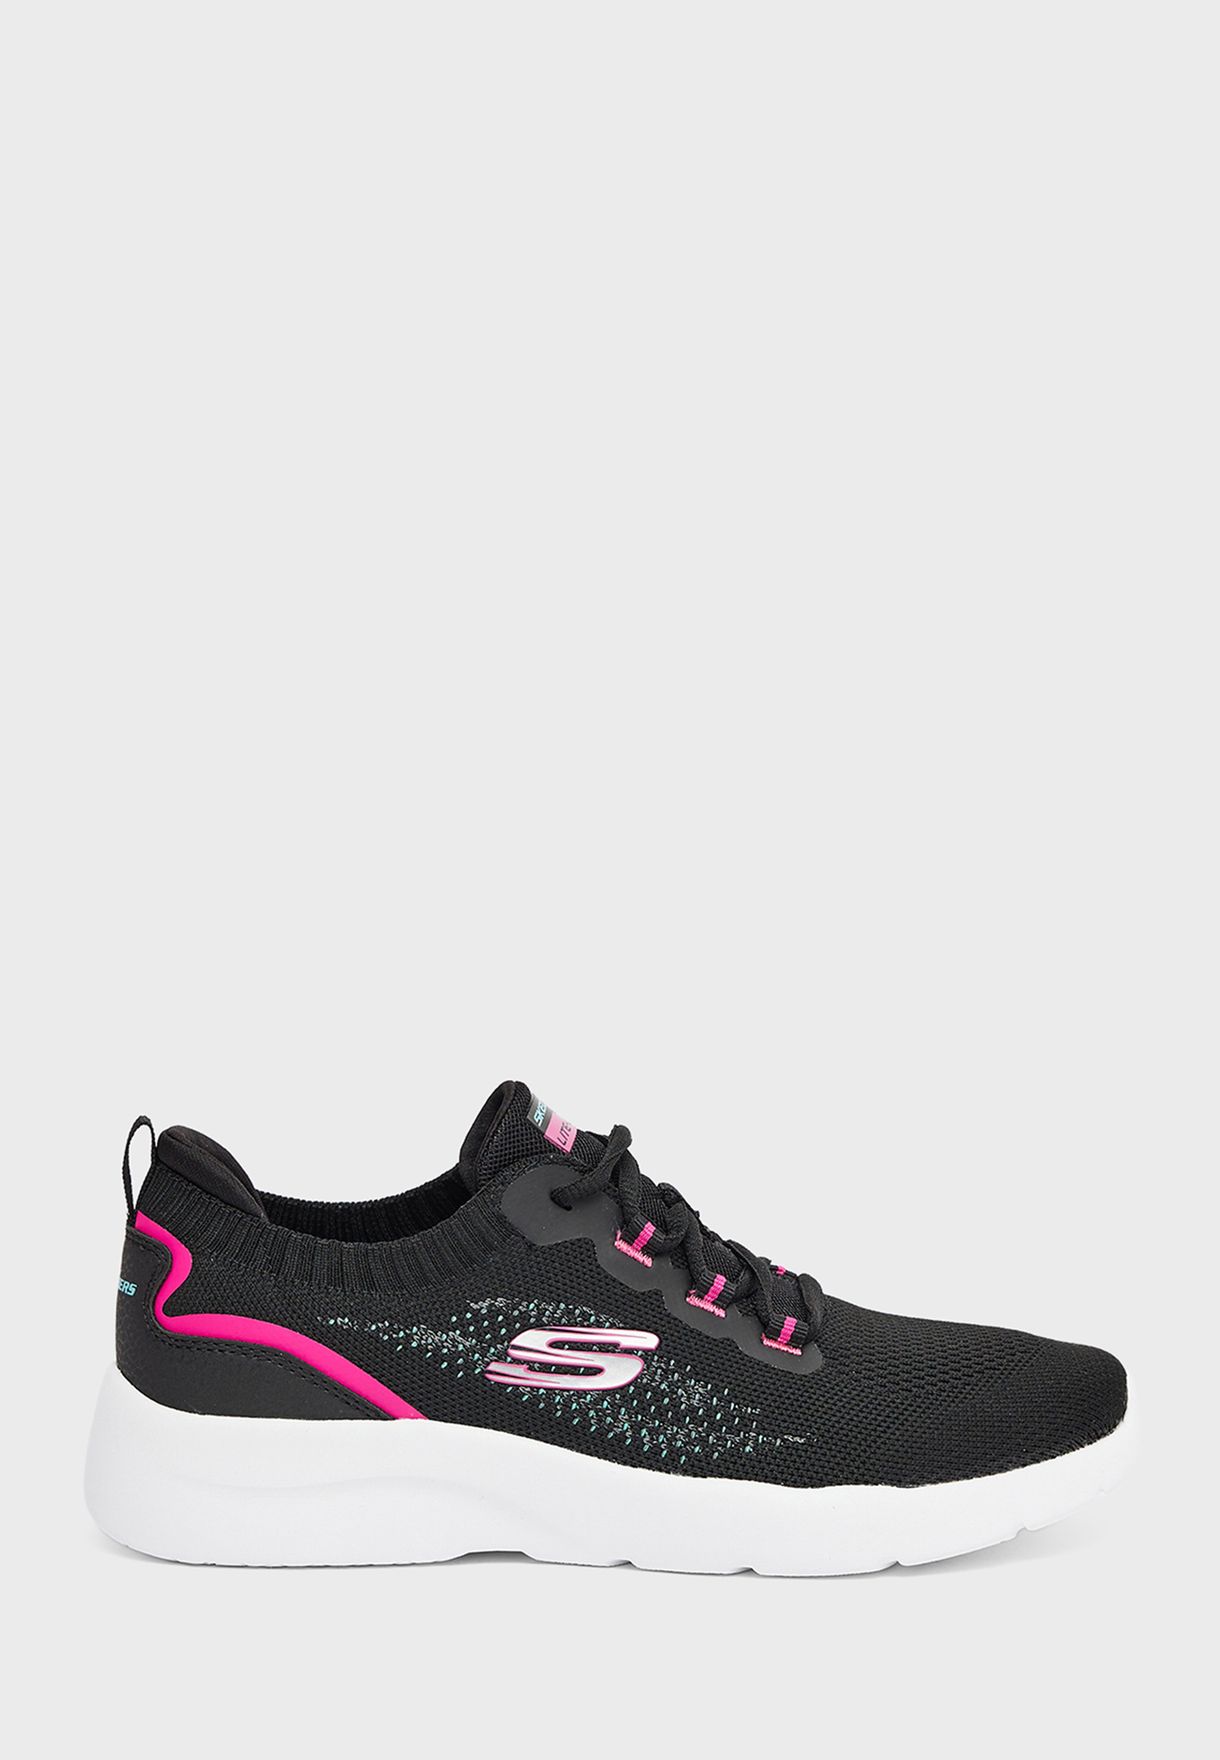 Dynamight 2.0 Sport Shoes